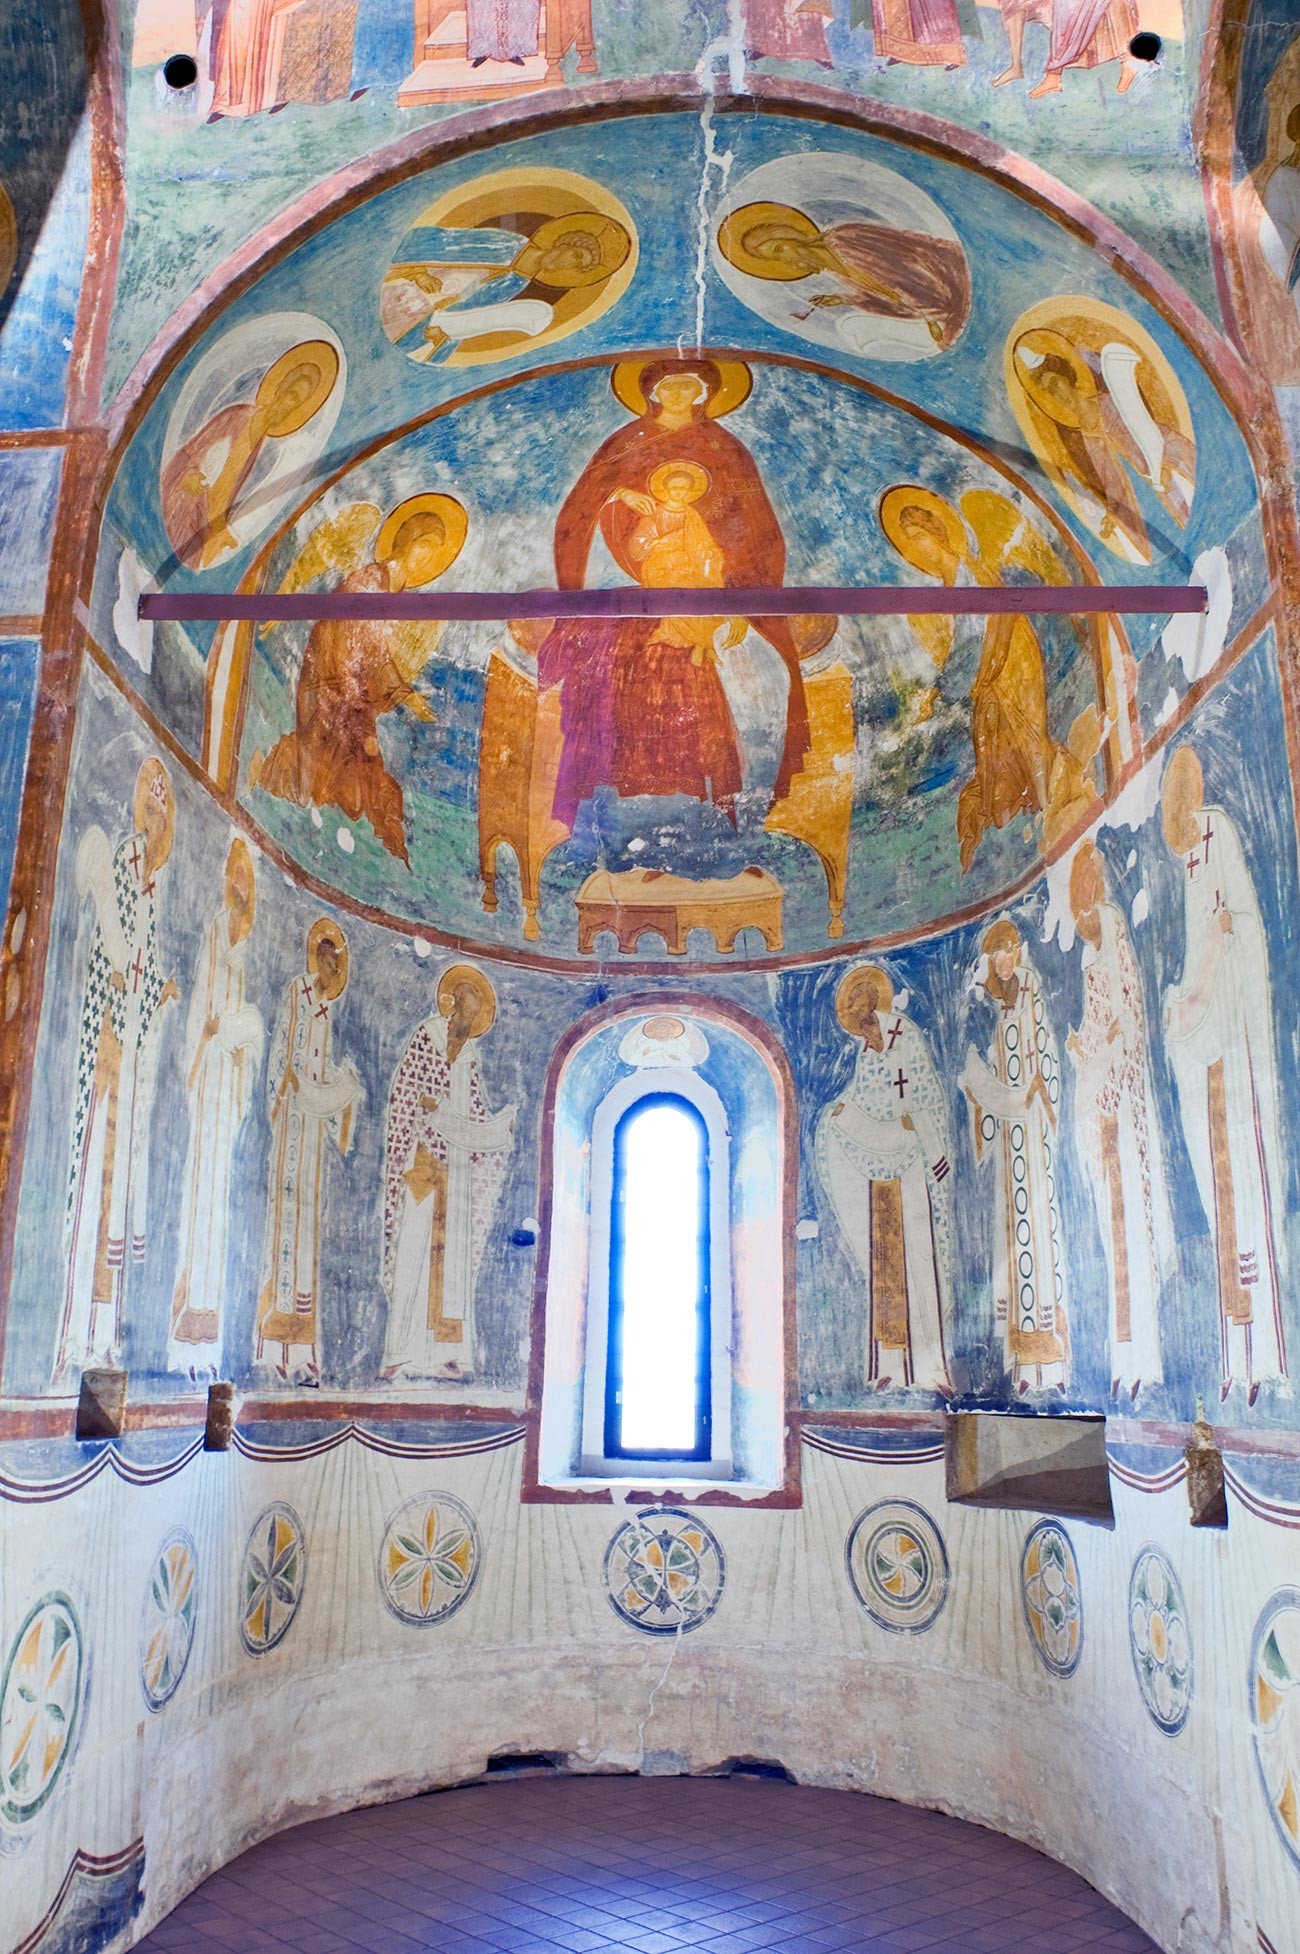 Cathedral of Nativity. Central apse (for main altar). Fresco of Mary enthroned with Archangels Gabriel & Michael. Lower row: Church Fathers at liturgy. June 1, 2014 